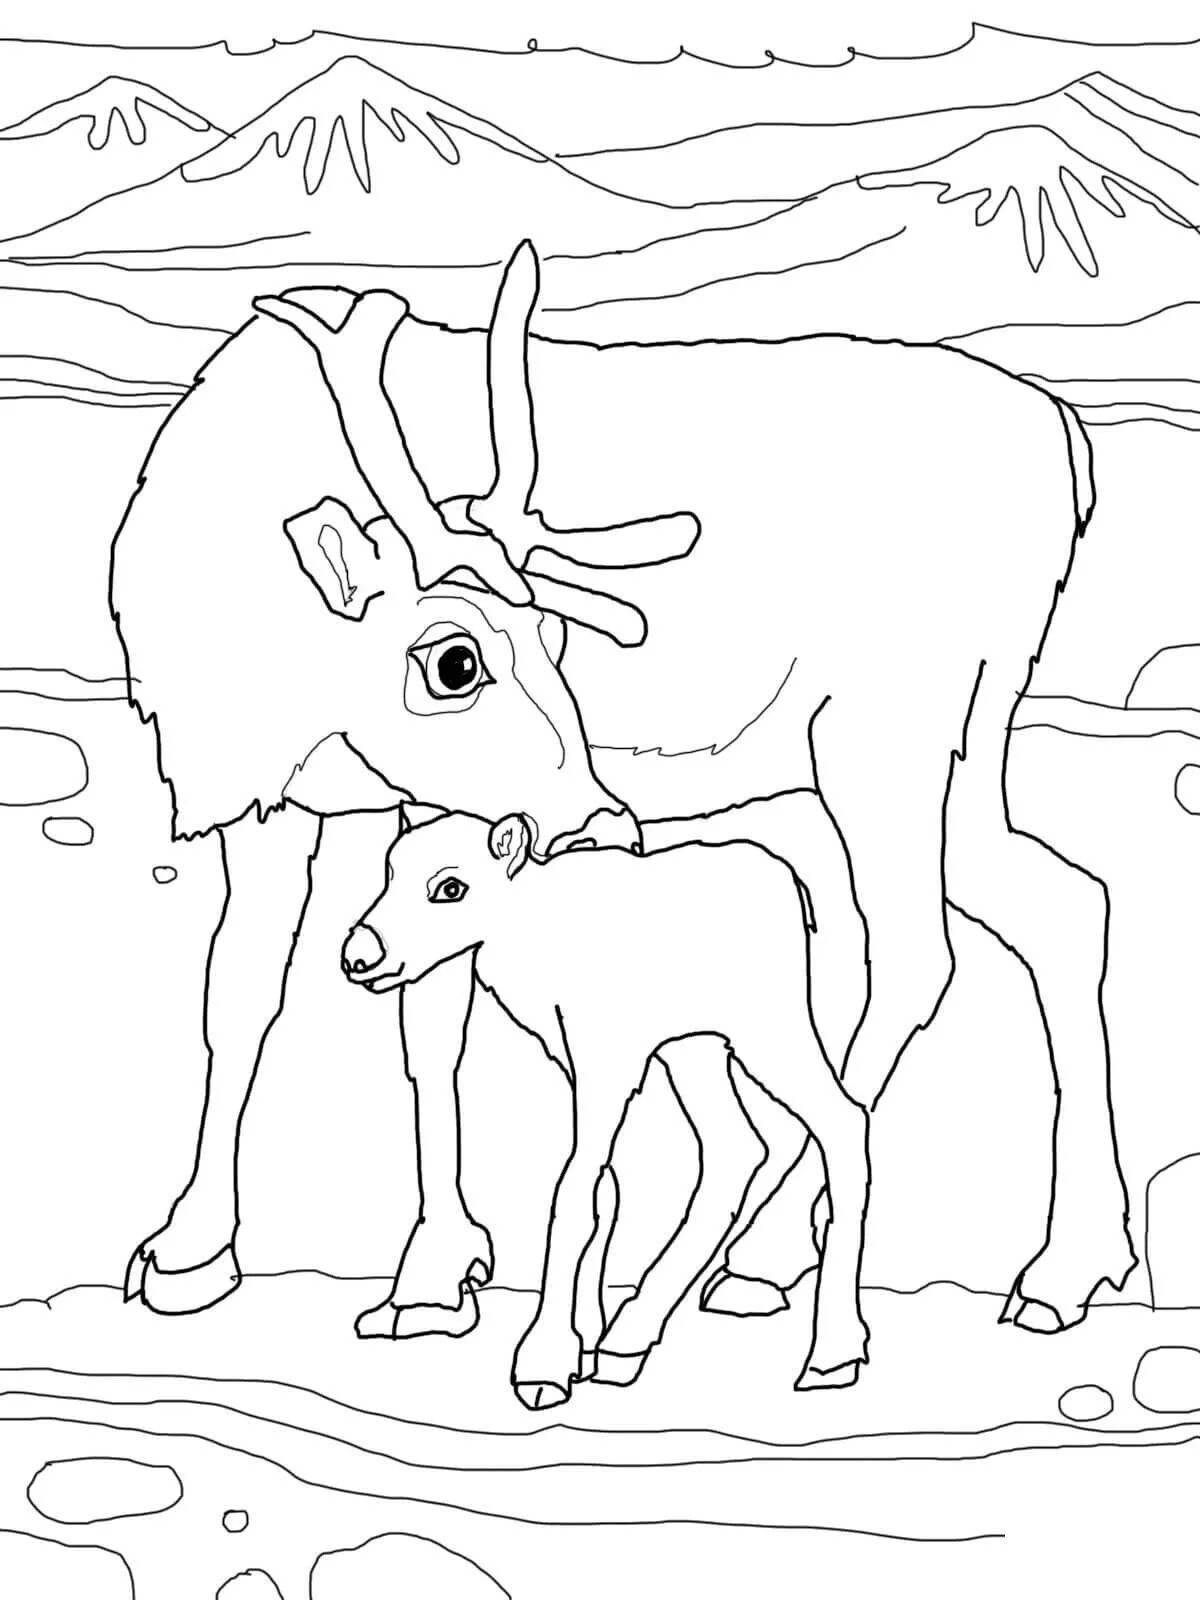 Colorful northern animals coloring pages for kindergarten